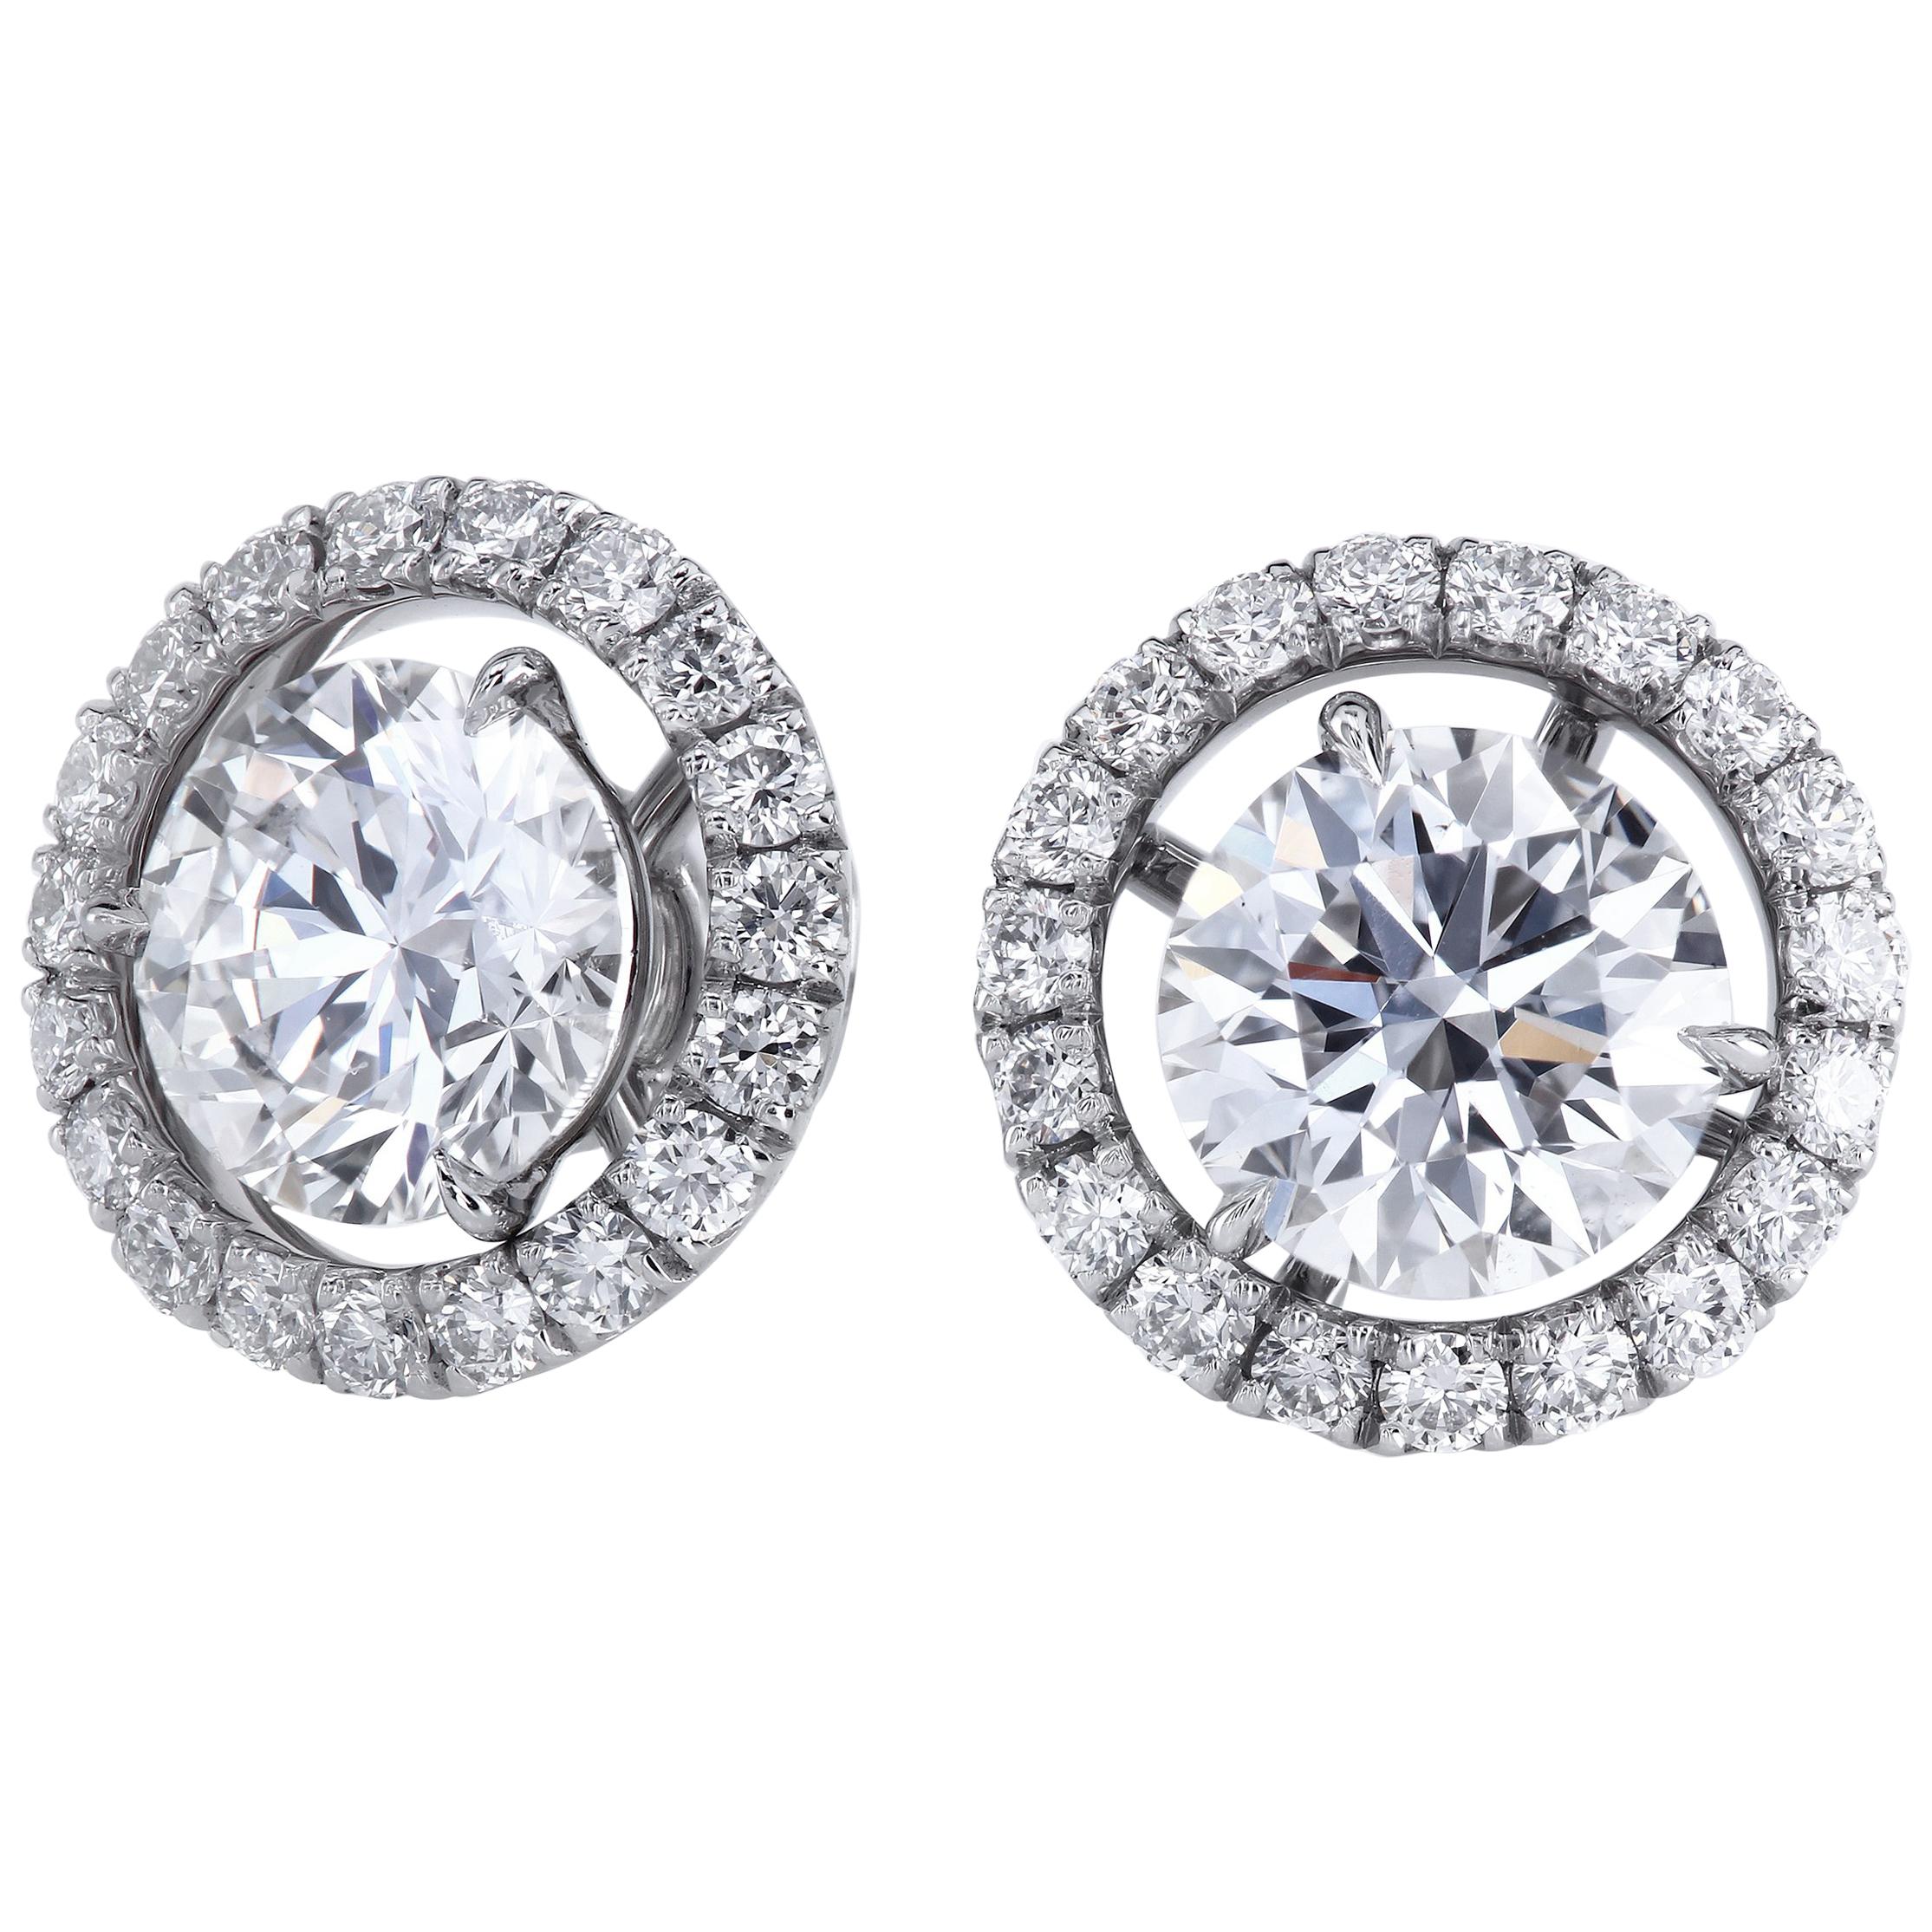 Leon Mege GIA-Cert Round Diamond Martini Studs with Removable Micro Pave Jackets